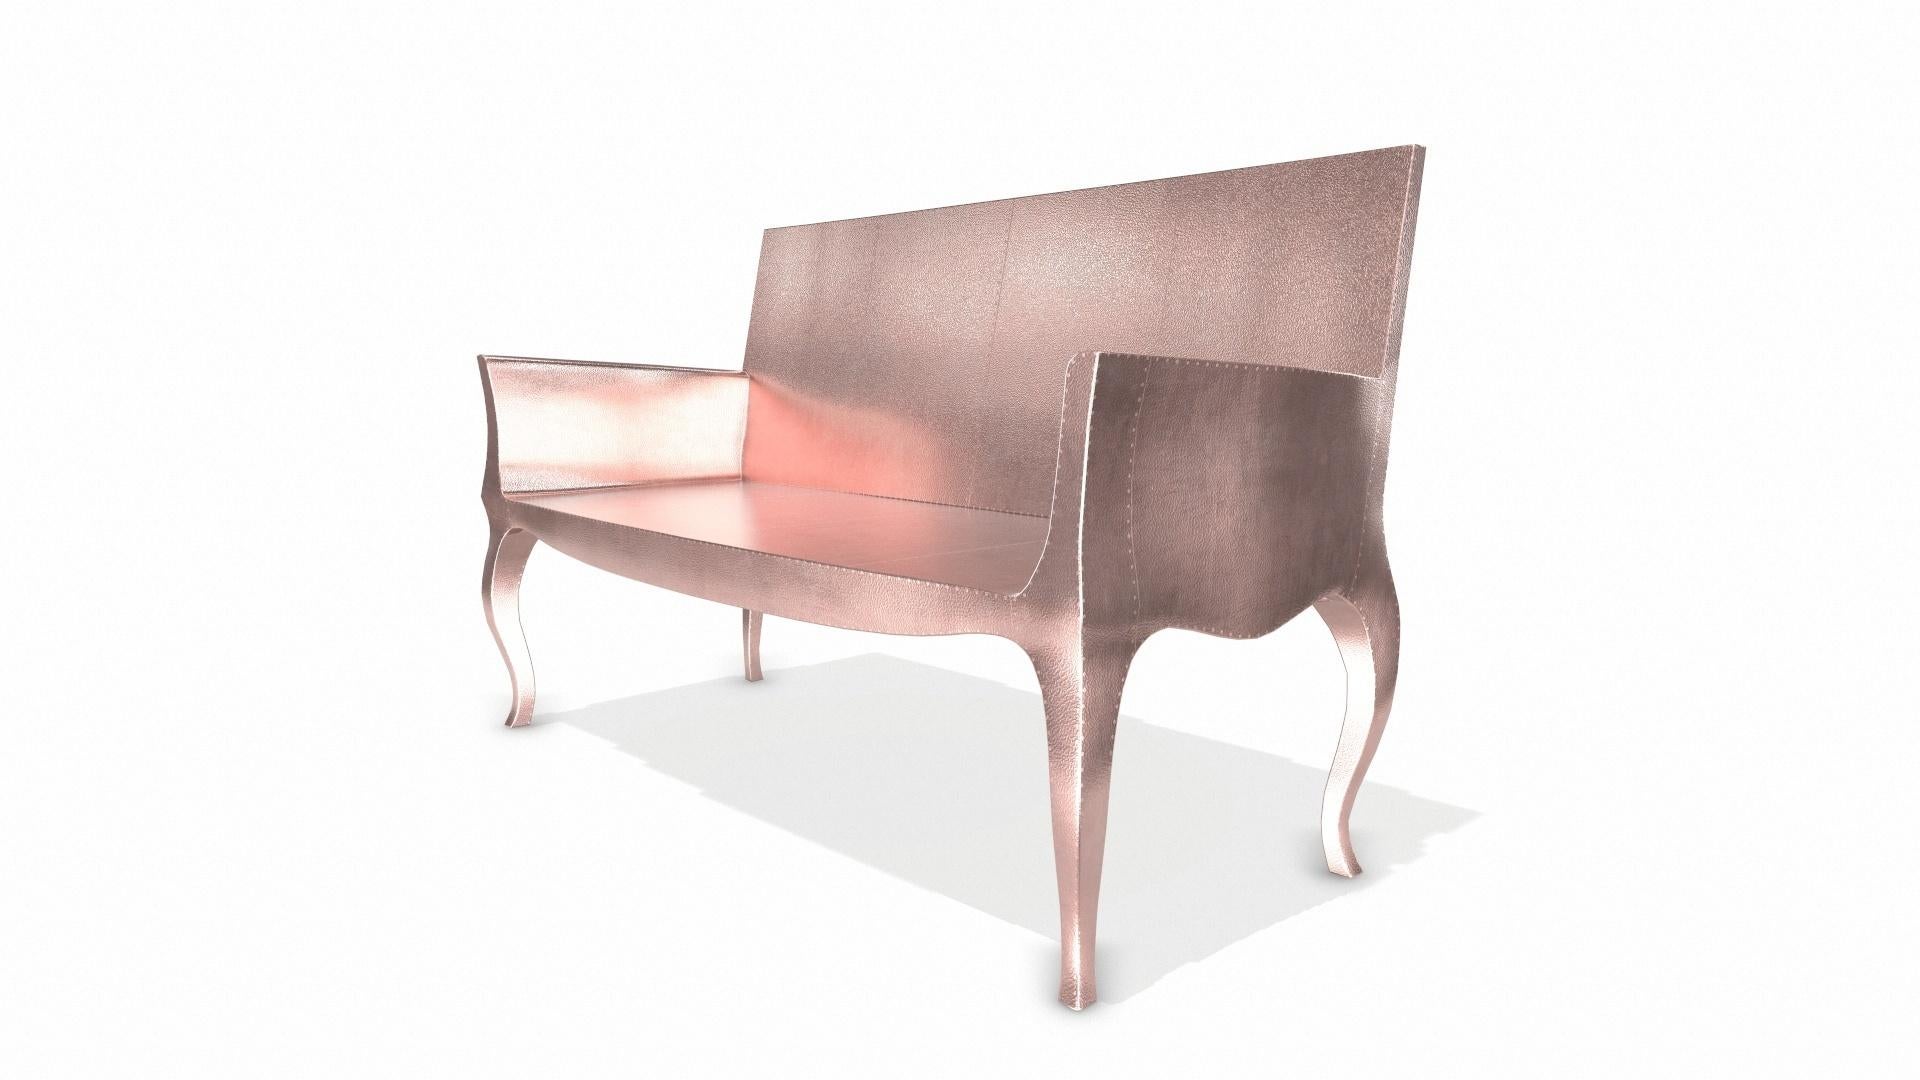 Woodwork Louise Settee Art Deco Chaise Longues in Fine Hammered Copper by Paul Mathieu For Sale